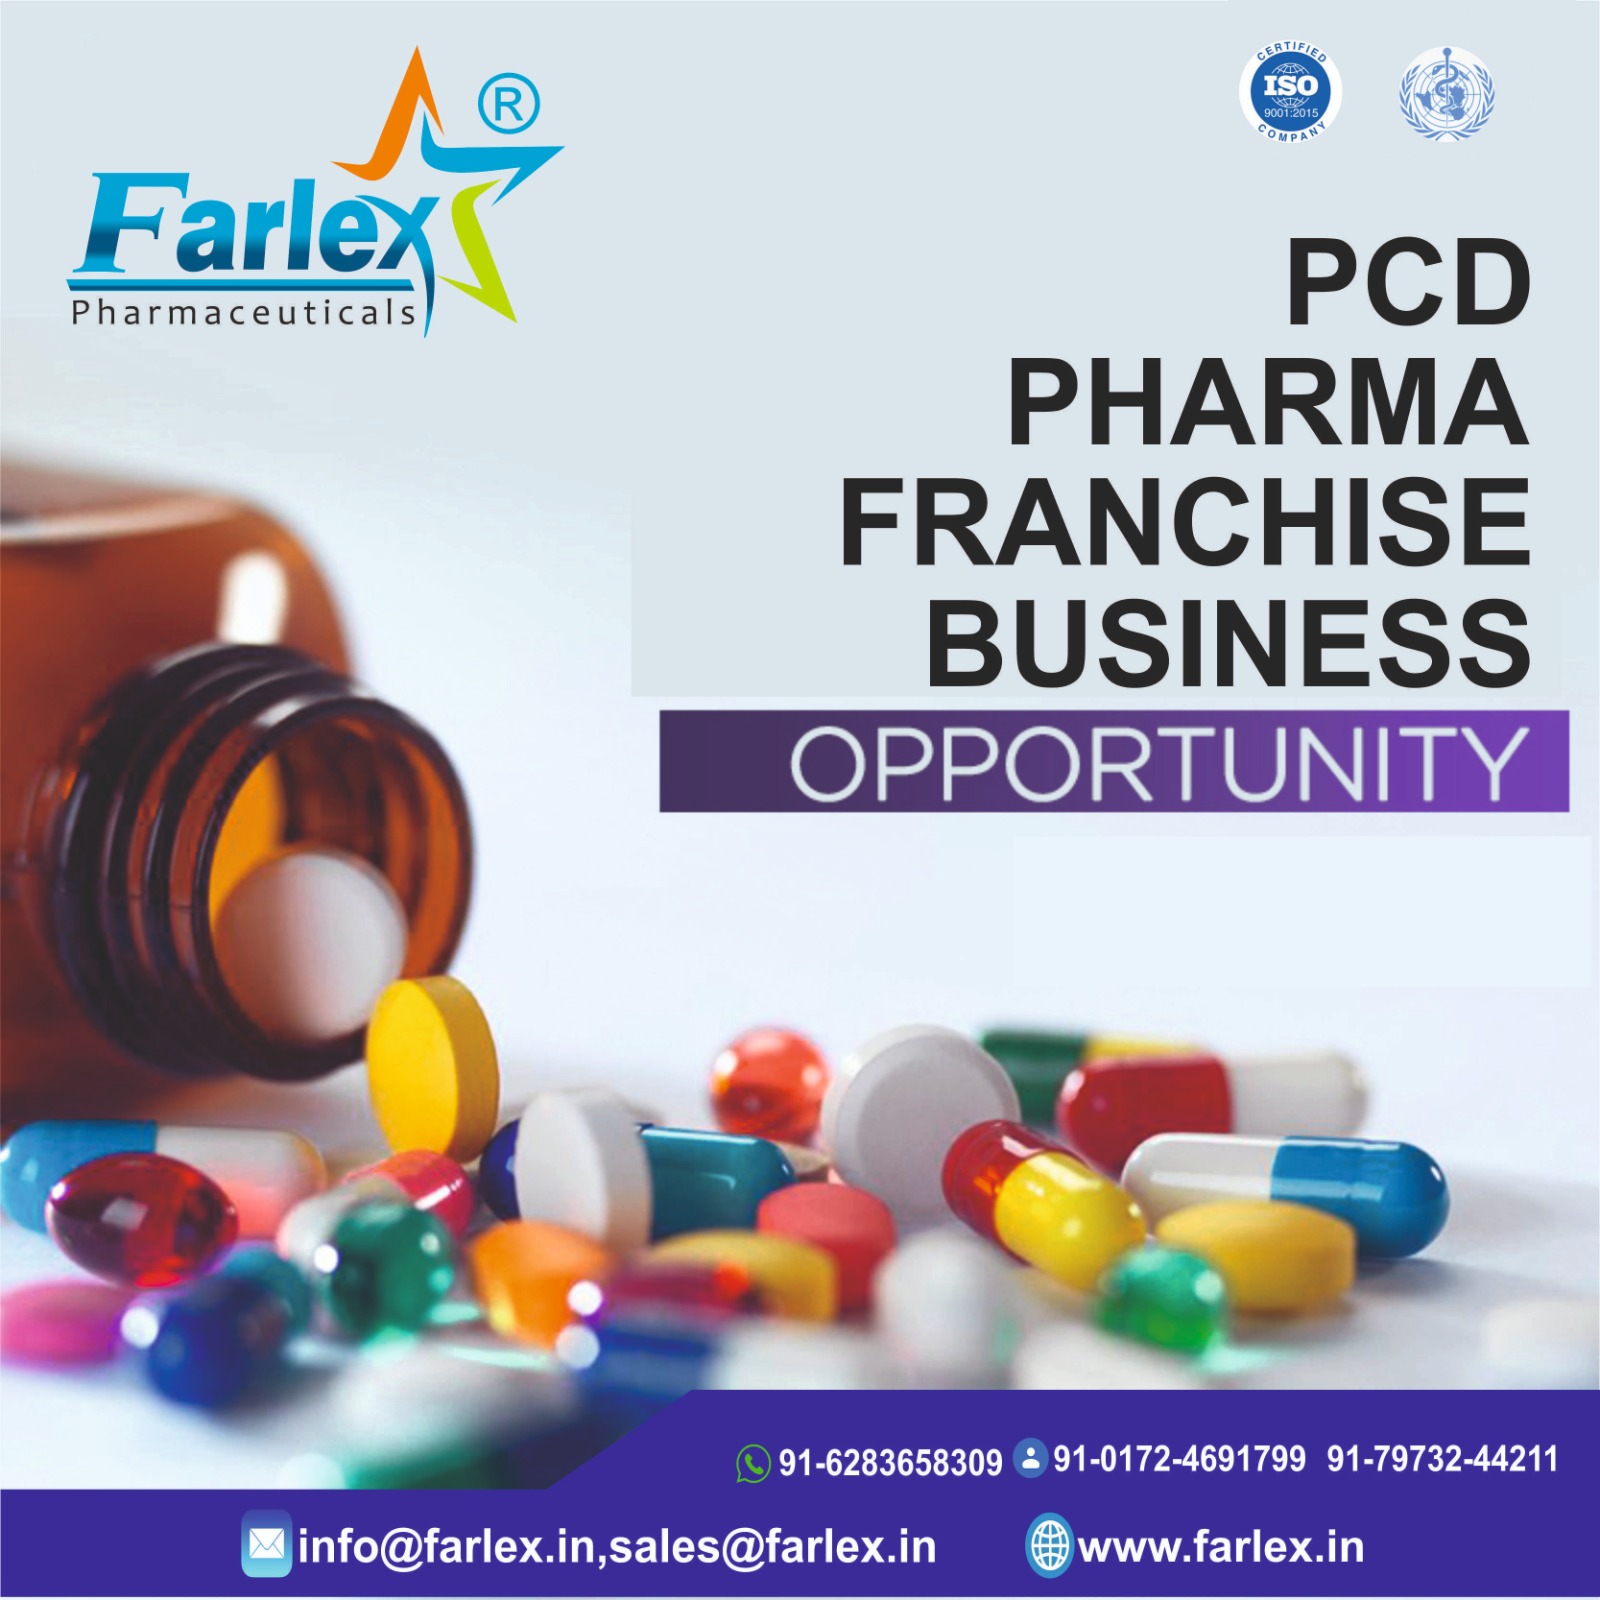 citriclabs | Monopoly PCD Pharma Franchise in India